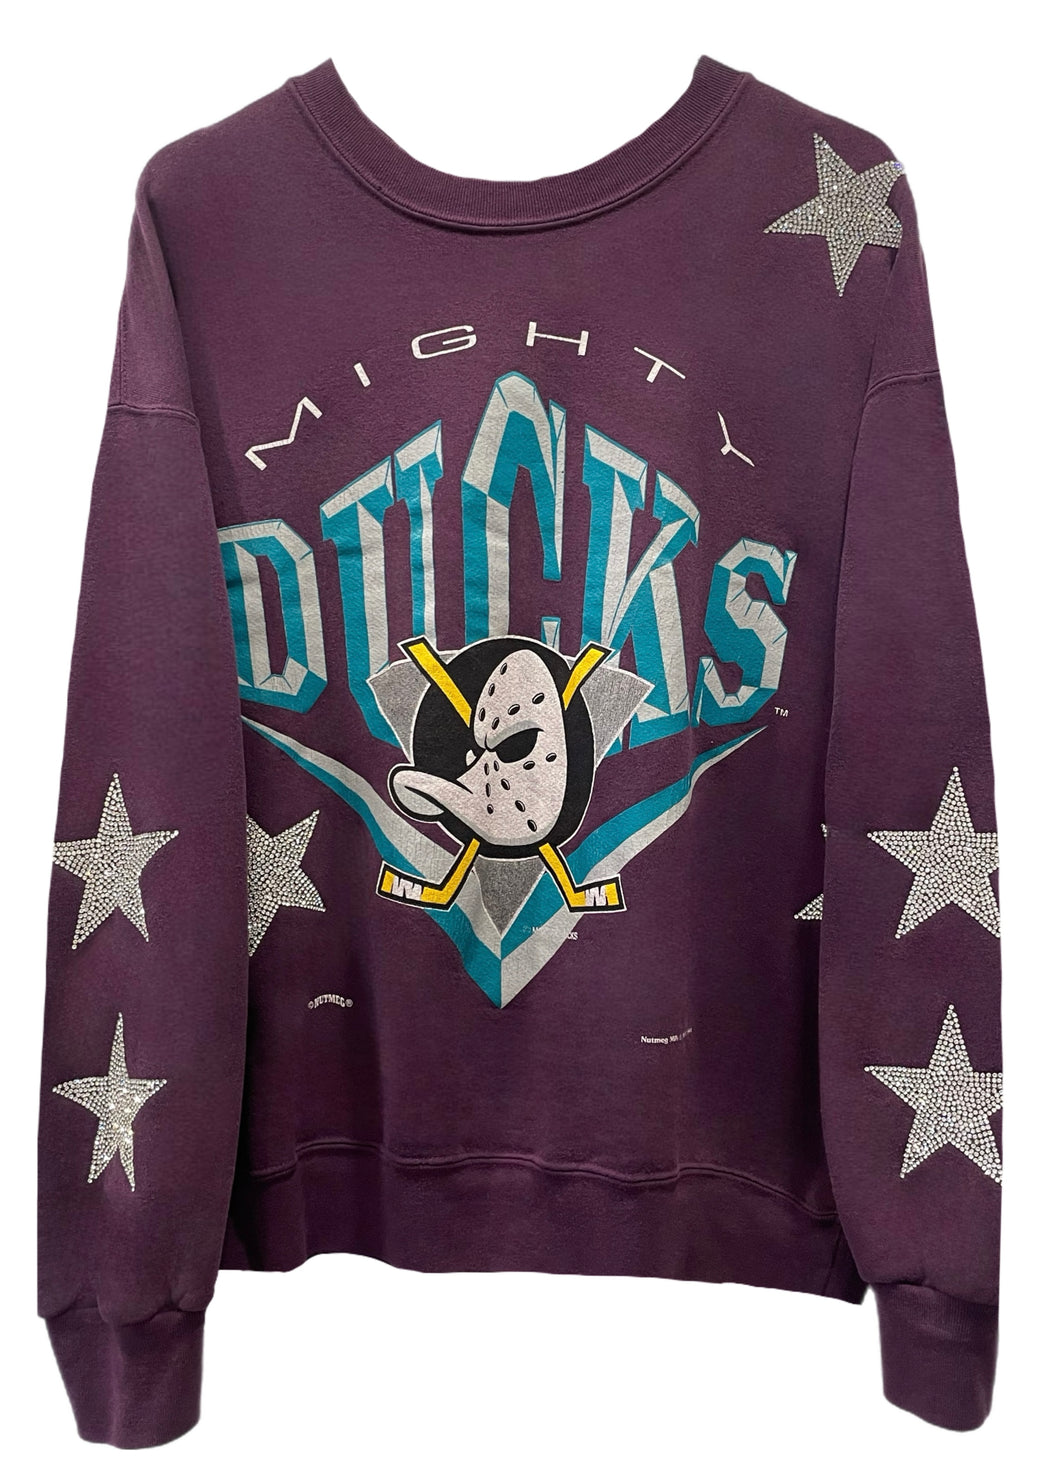 Anaheim Ducks, Hockey One of a KIND Vintage “Mighty Ducks” Rare Find 1994 Sweatshirt with All Over Crystal Star Design